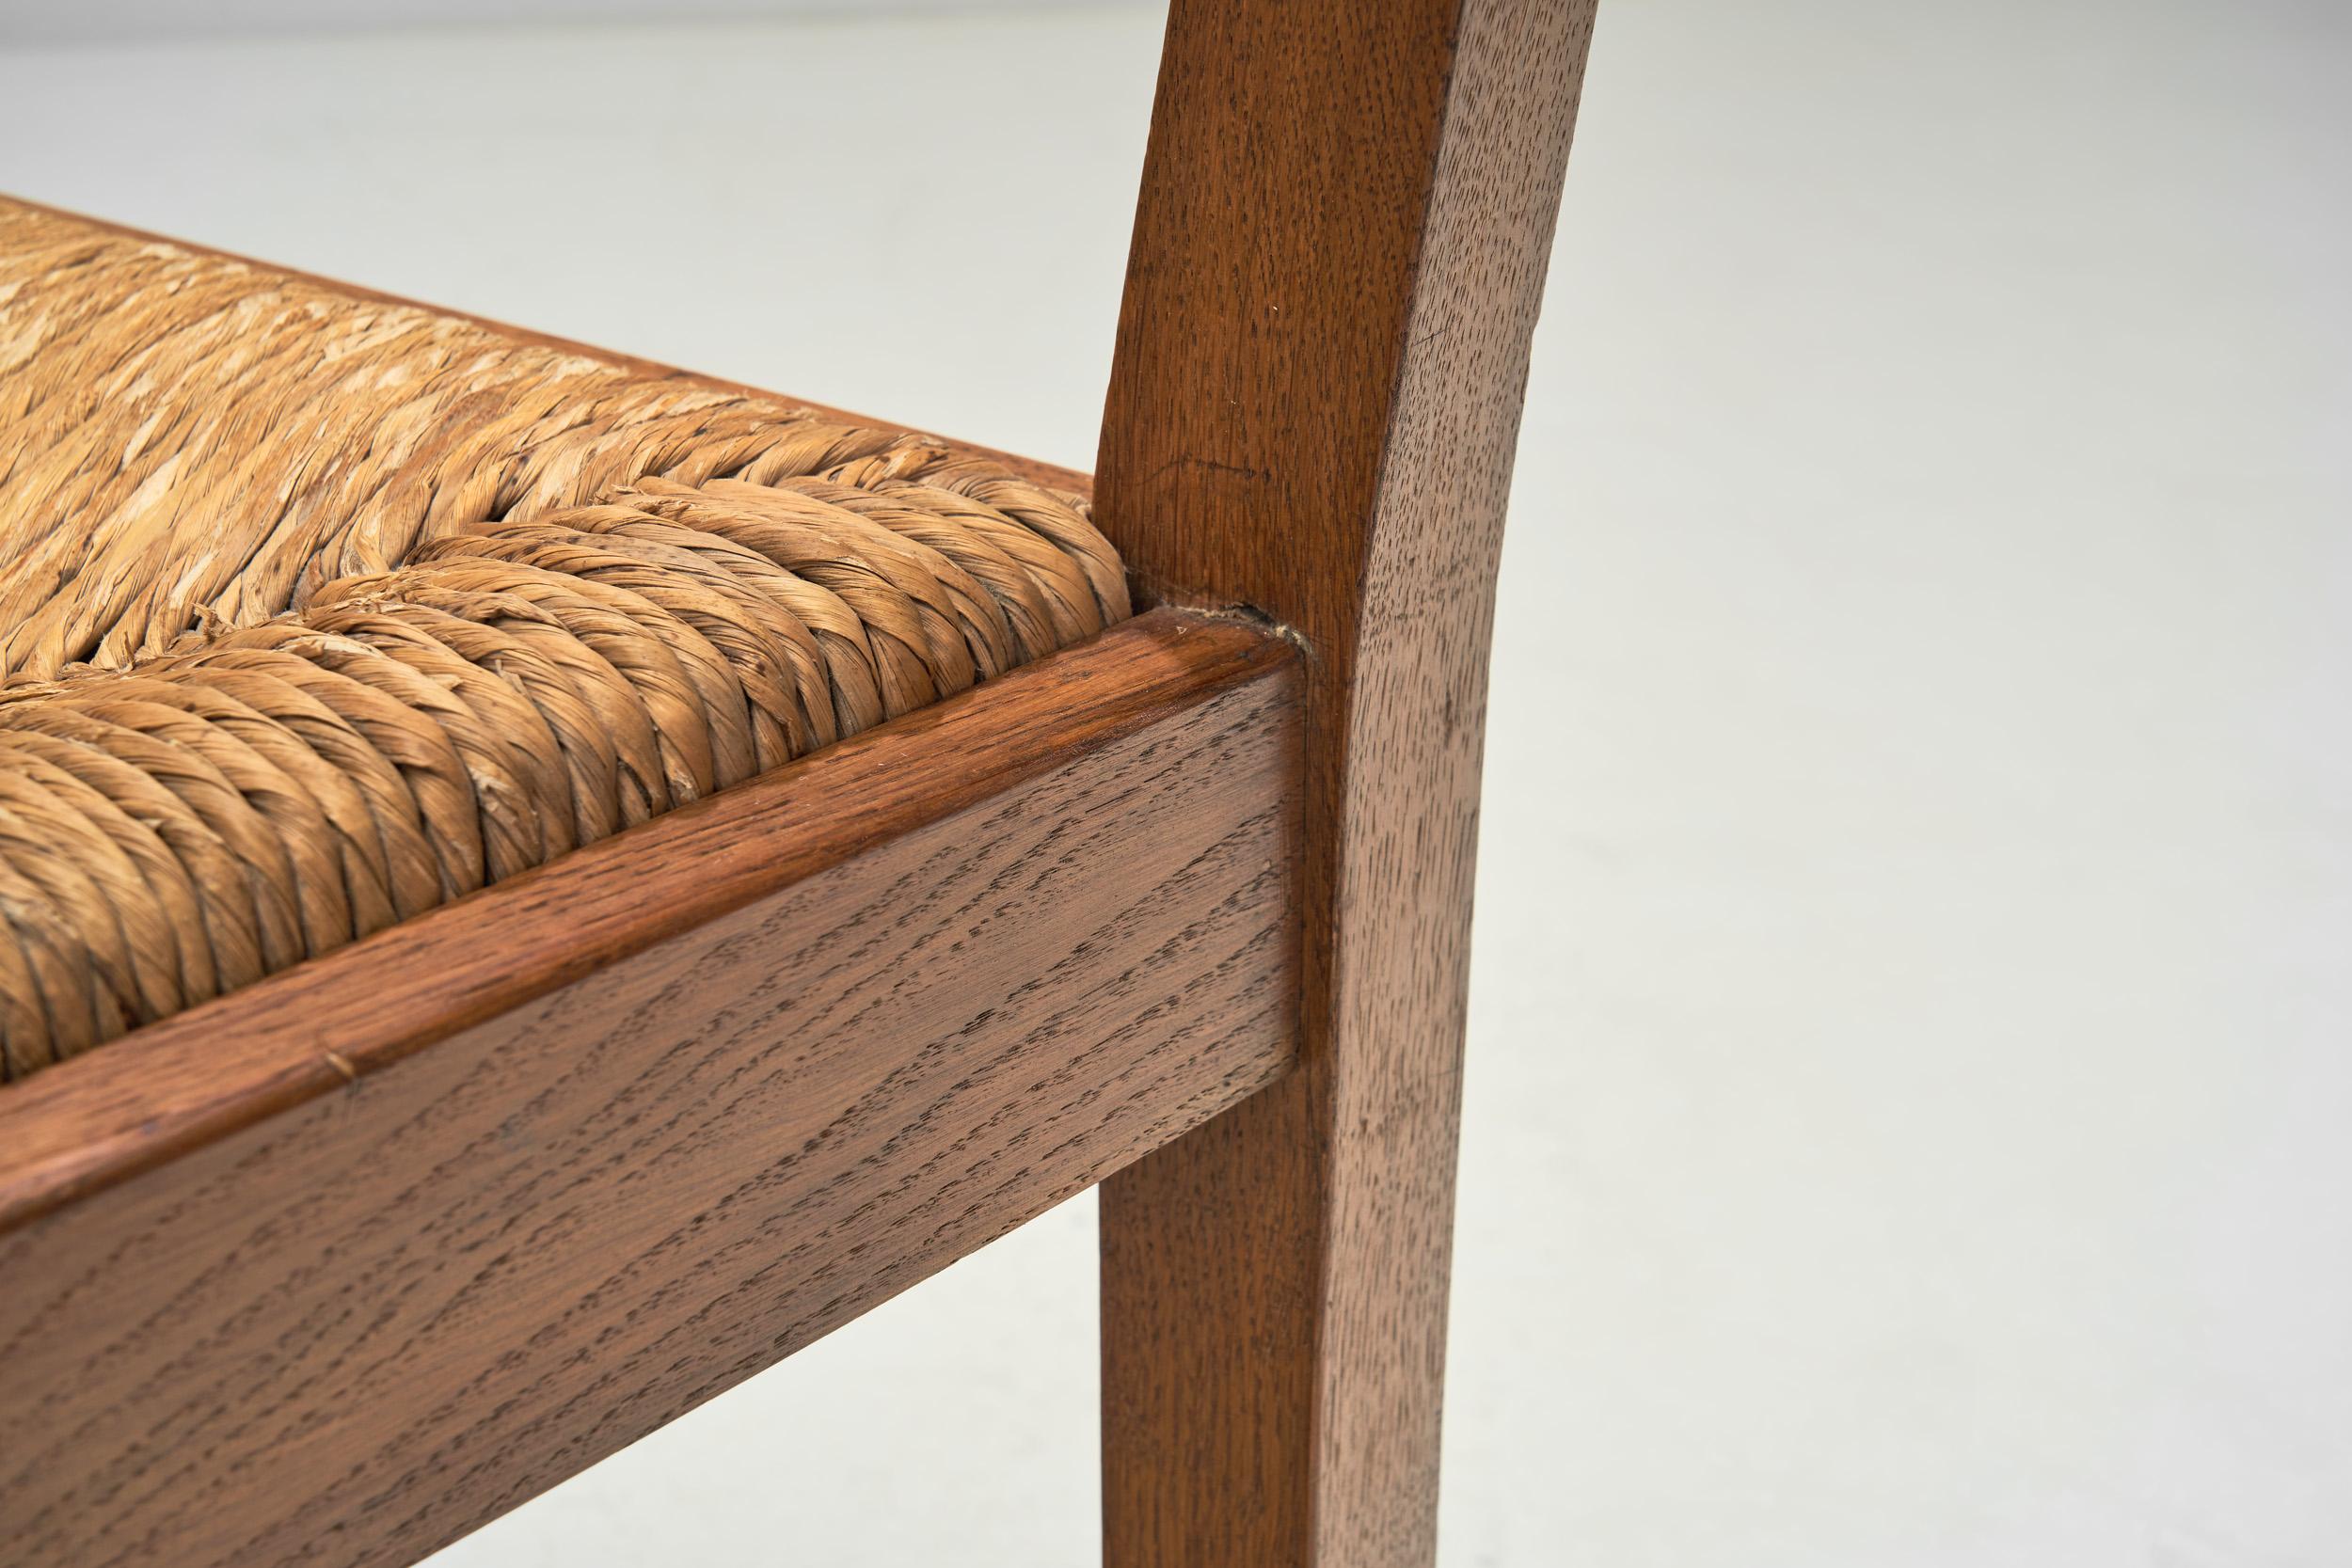 Oak Worpsweder Armchair by Willi Ohler for Erich Schultz, Germany 1920s For Sale 7